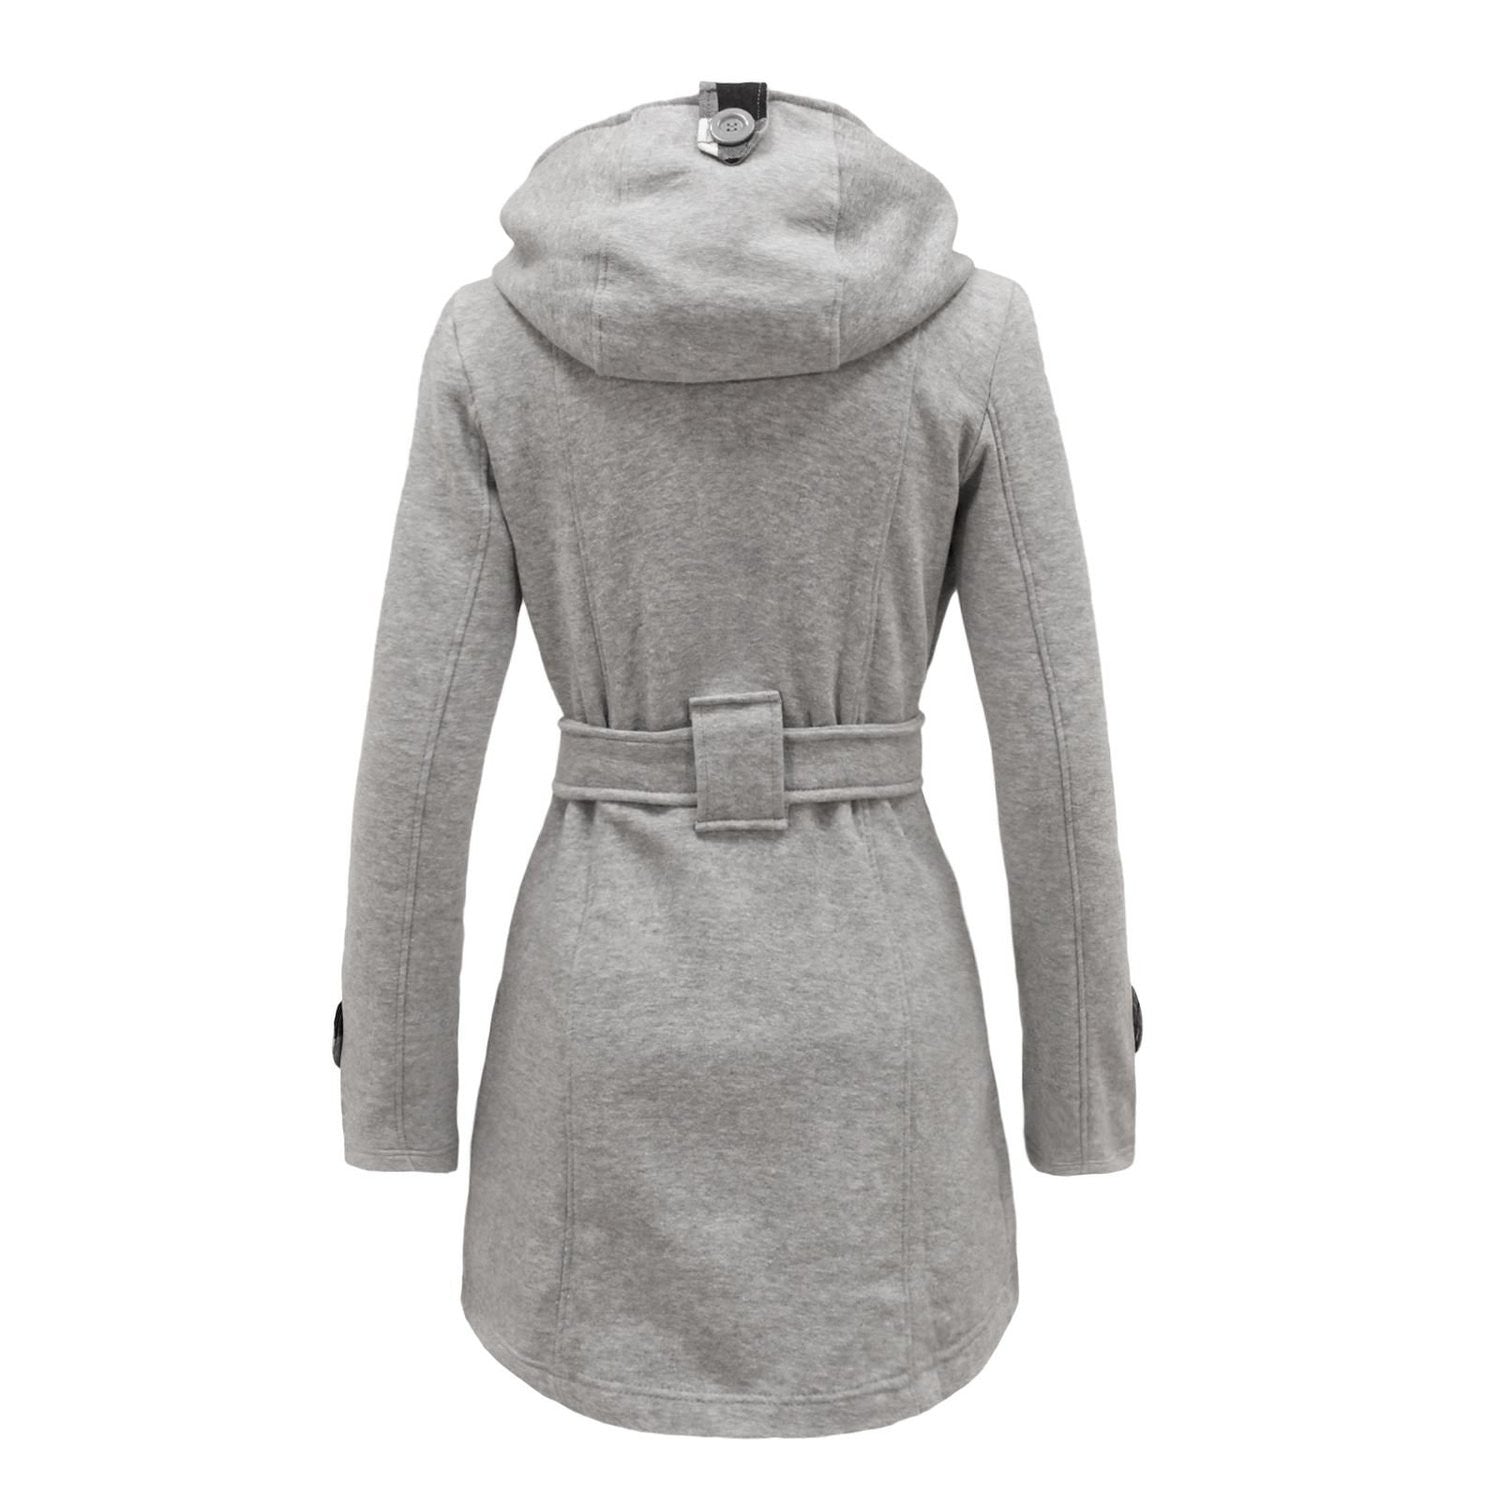 Plus Size Double Breasted Long with Belt Hooded Coat - Oh Yours Fashion - 9